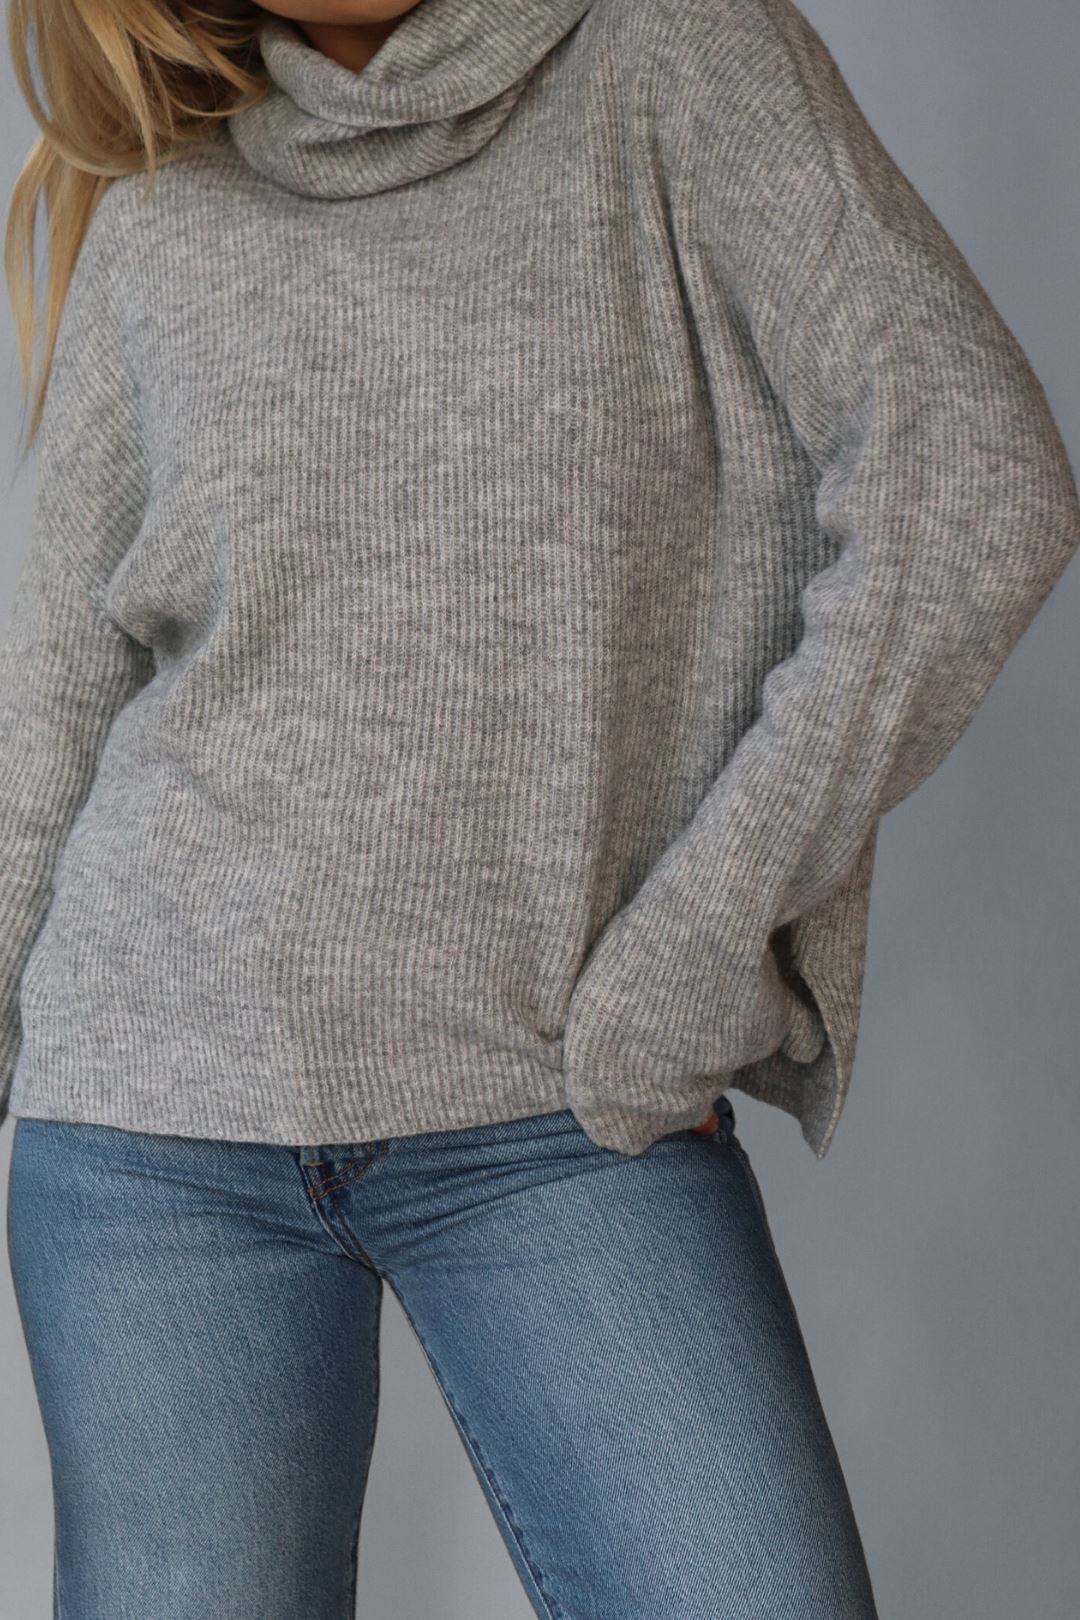 GREY RIBBED TURTLENECK SWEATER Sweater RD STYLE 